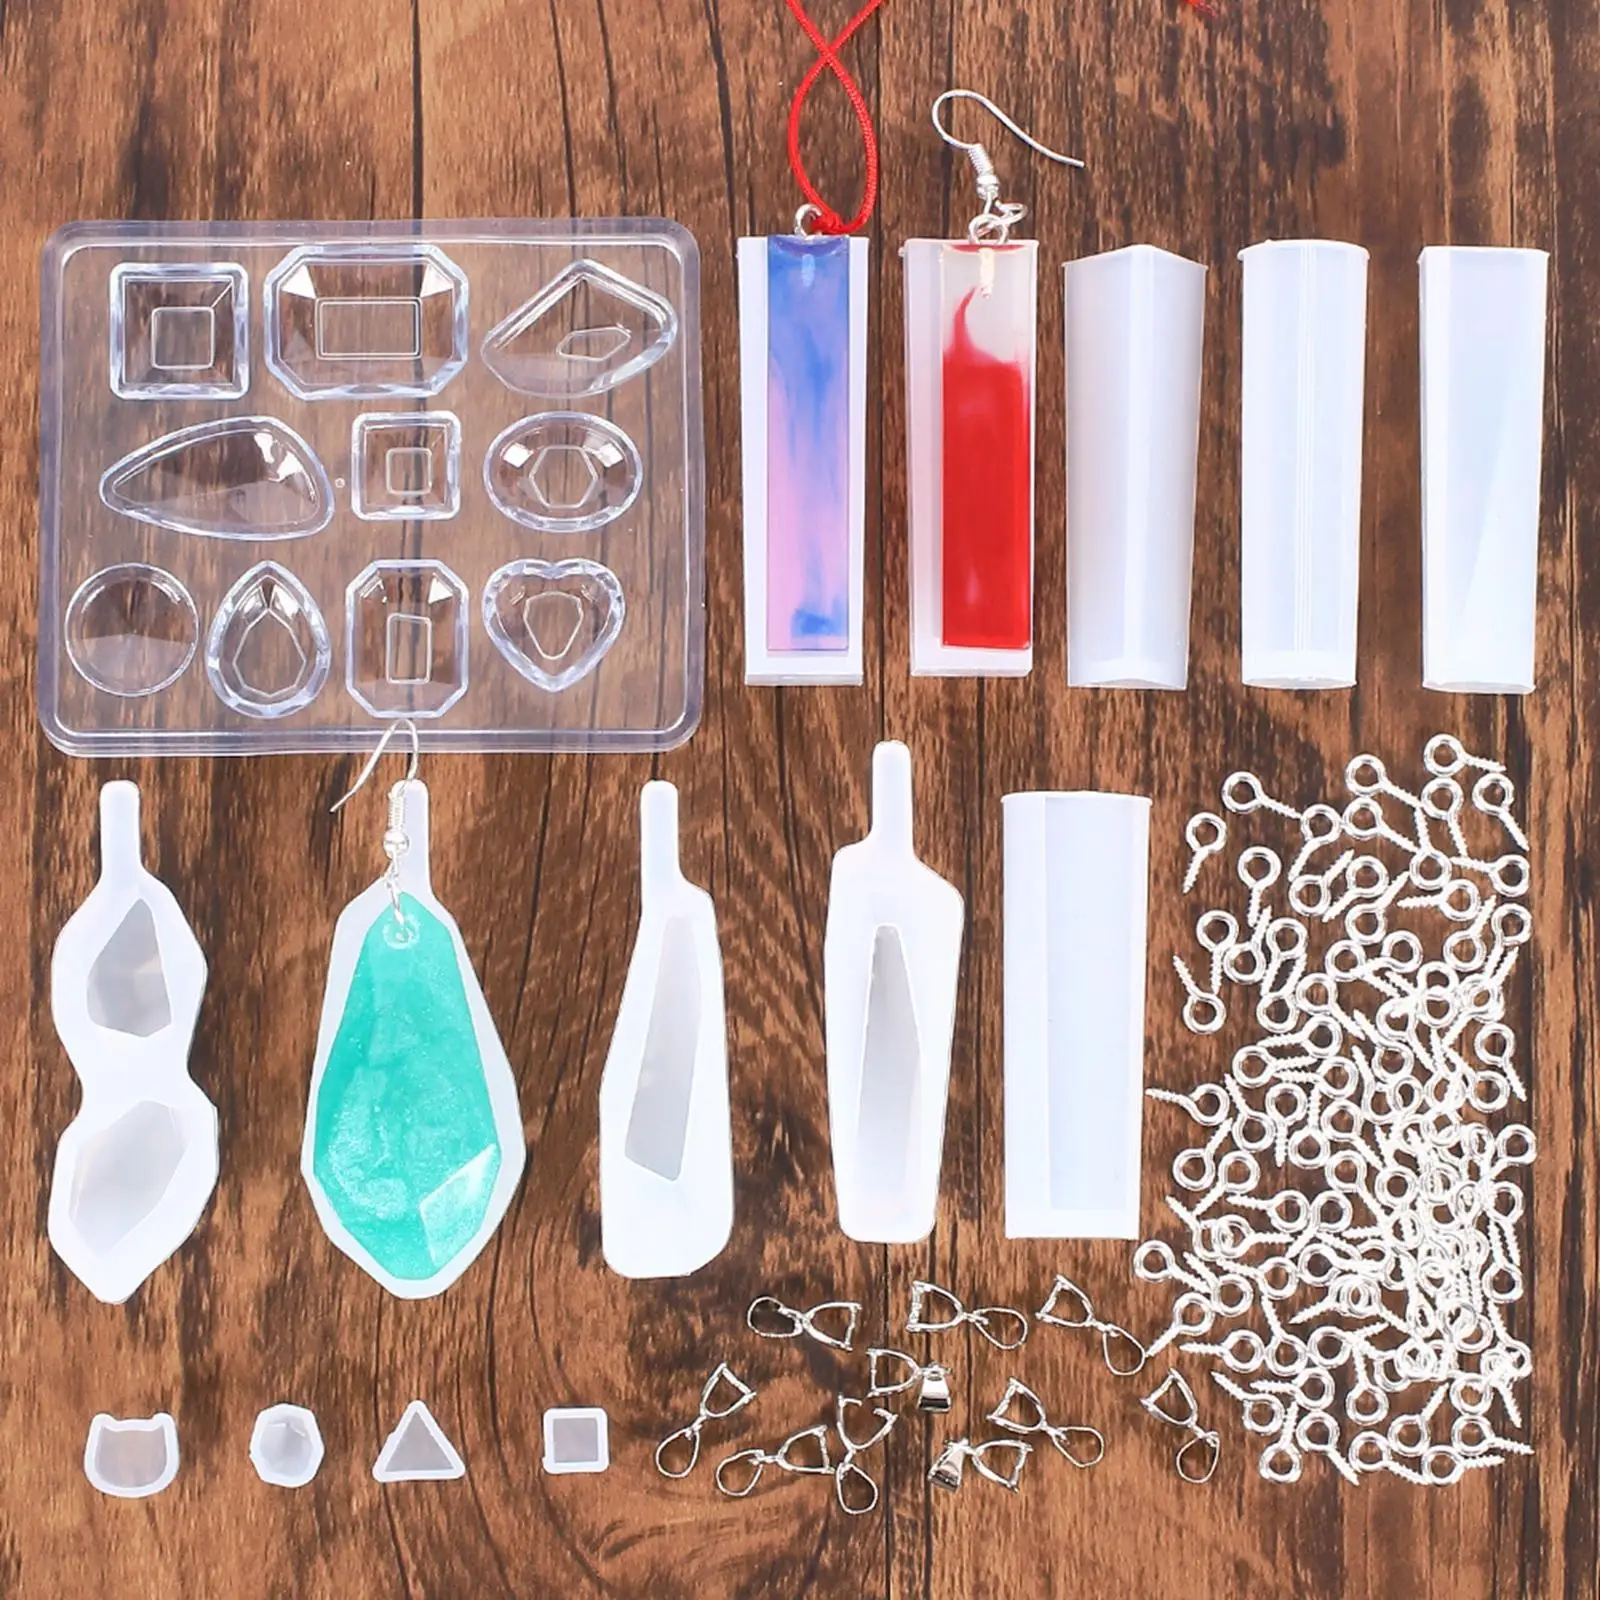 15x Crystal Epoxy  DIY  DIY Jewelry Making Crafts Silicone  for Necklace Bracelet Keyrings Charms 100x Screw Eye Pins